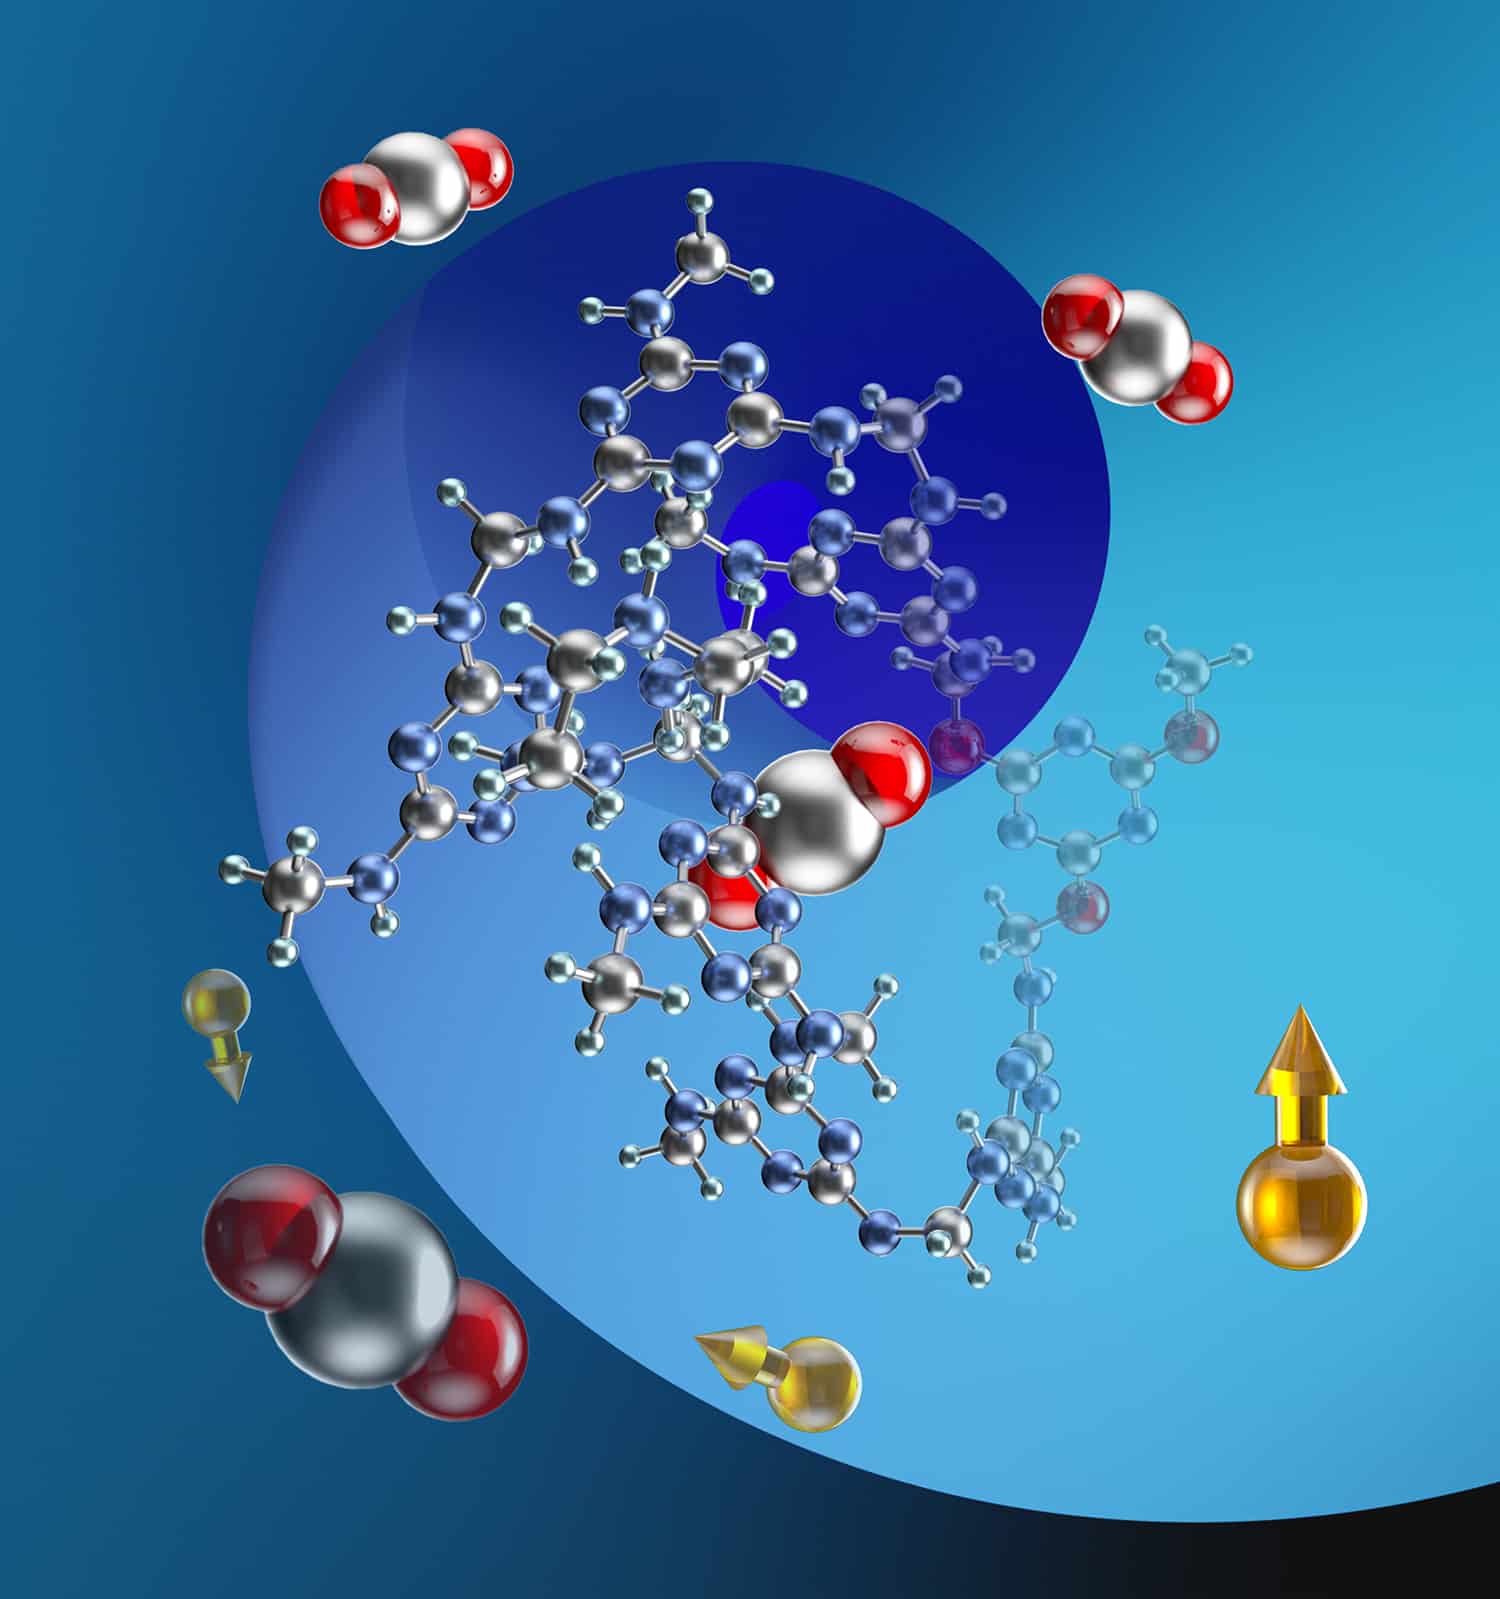 In the graphic, carbon dioxide molecules (carbon in silver, oxygen in red) interact with amines in the material (nitrogen in blue, hydrogen in green), allowing the material to adsorb the gas from smokestack emissions. The yellow balls with arrows represent carbon-13 isotopes and their nuclear spins, which were employed in NMR studies of the material.